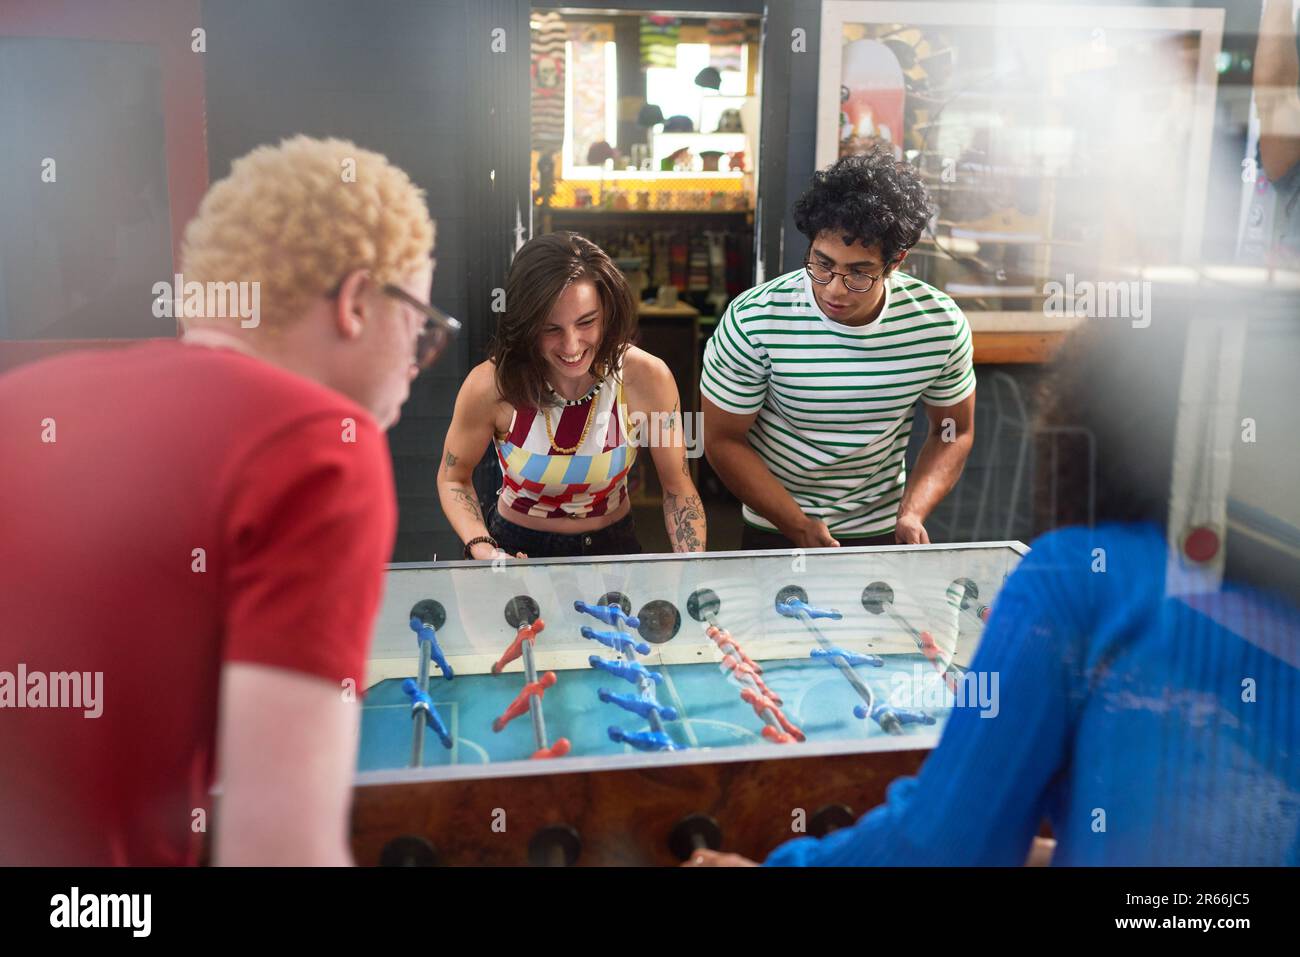 Happy young friends playing foosball in game room Stock Photo